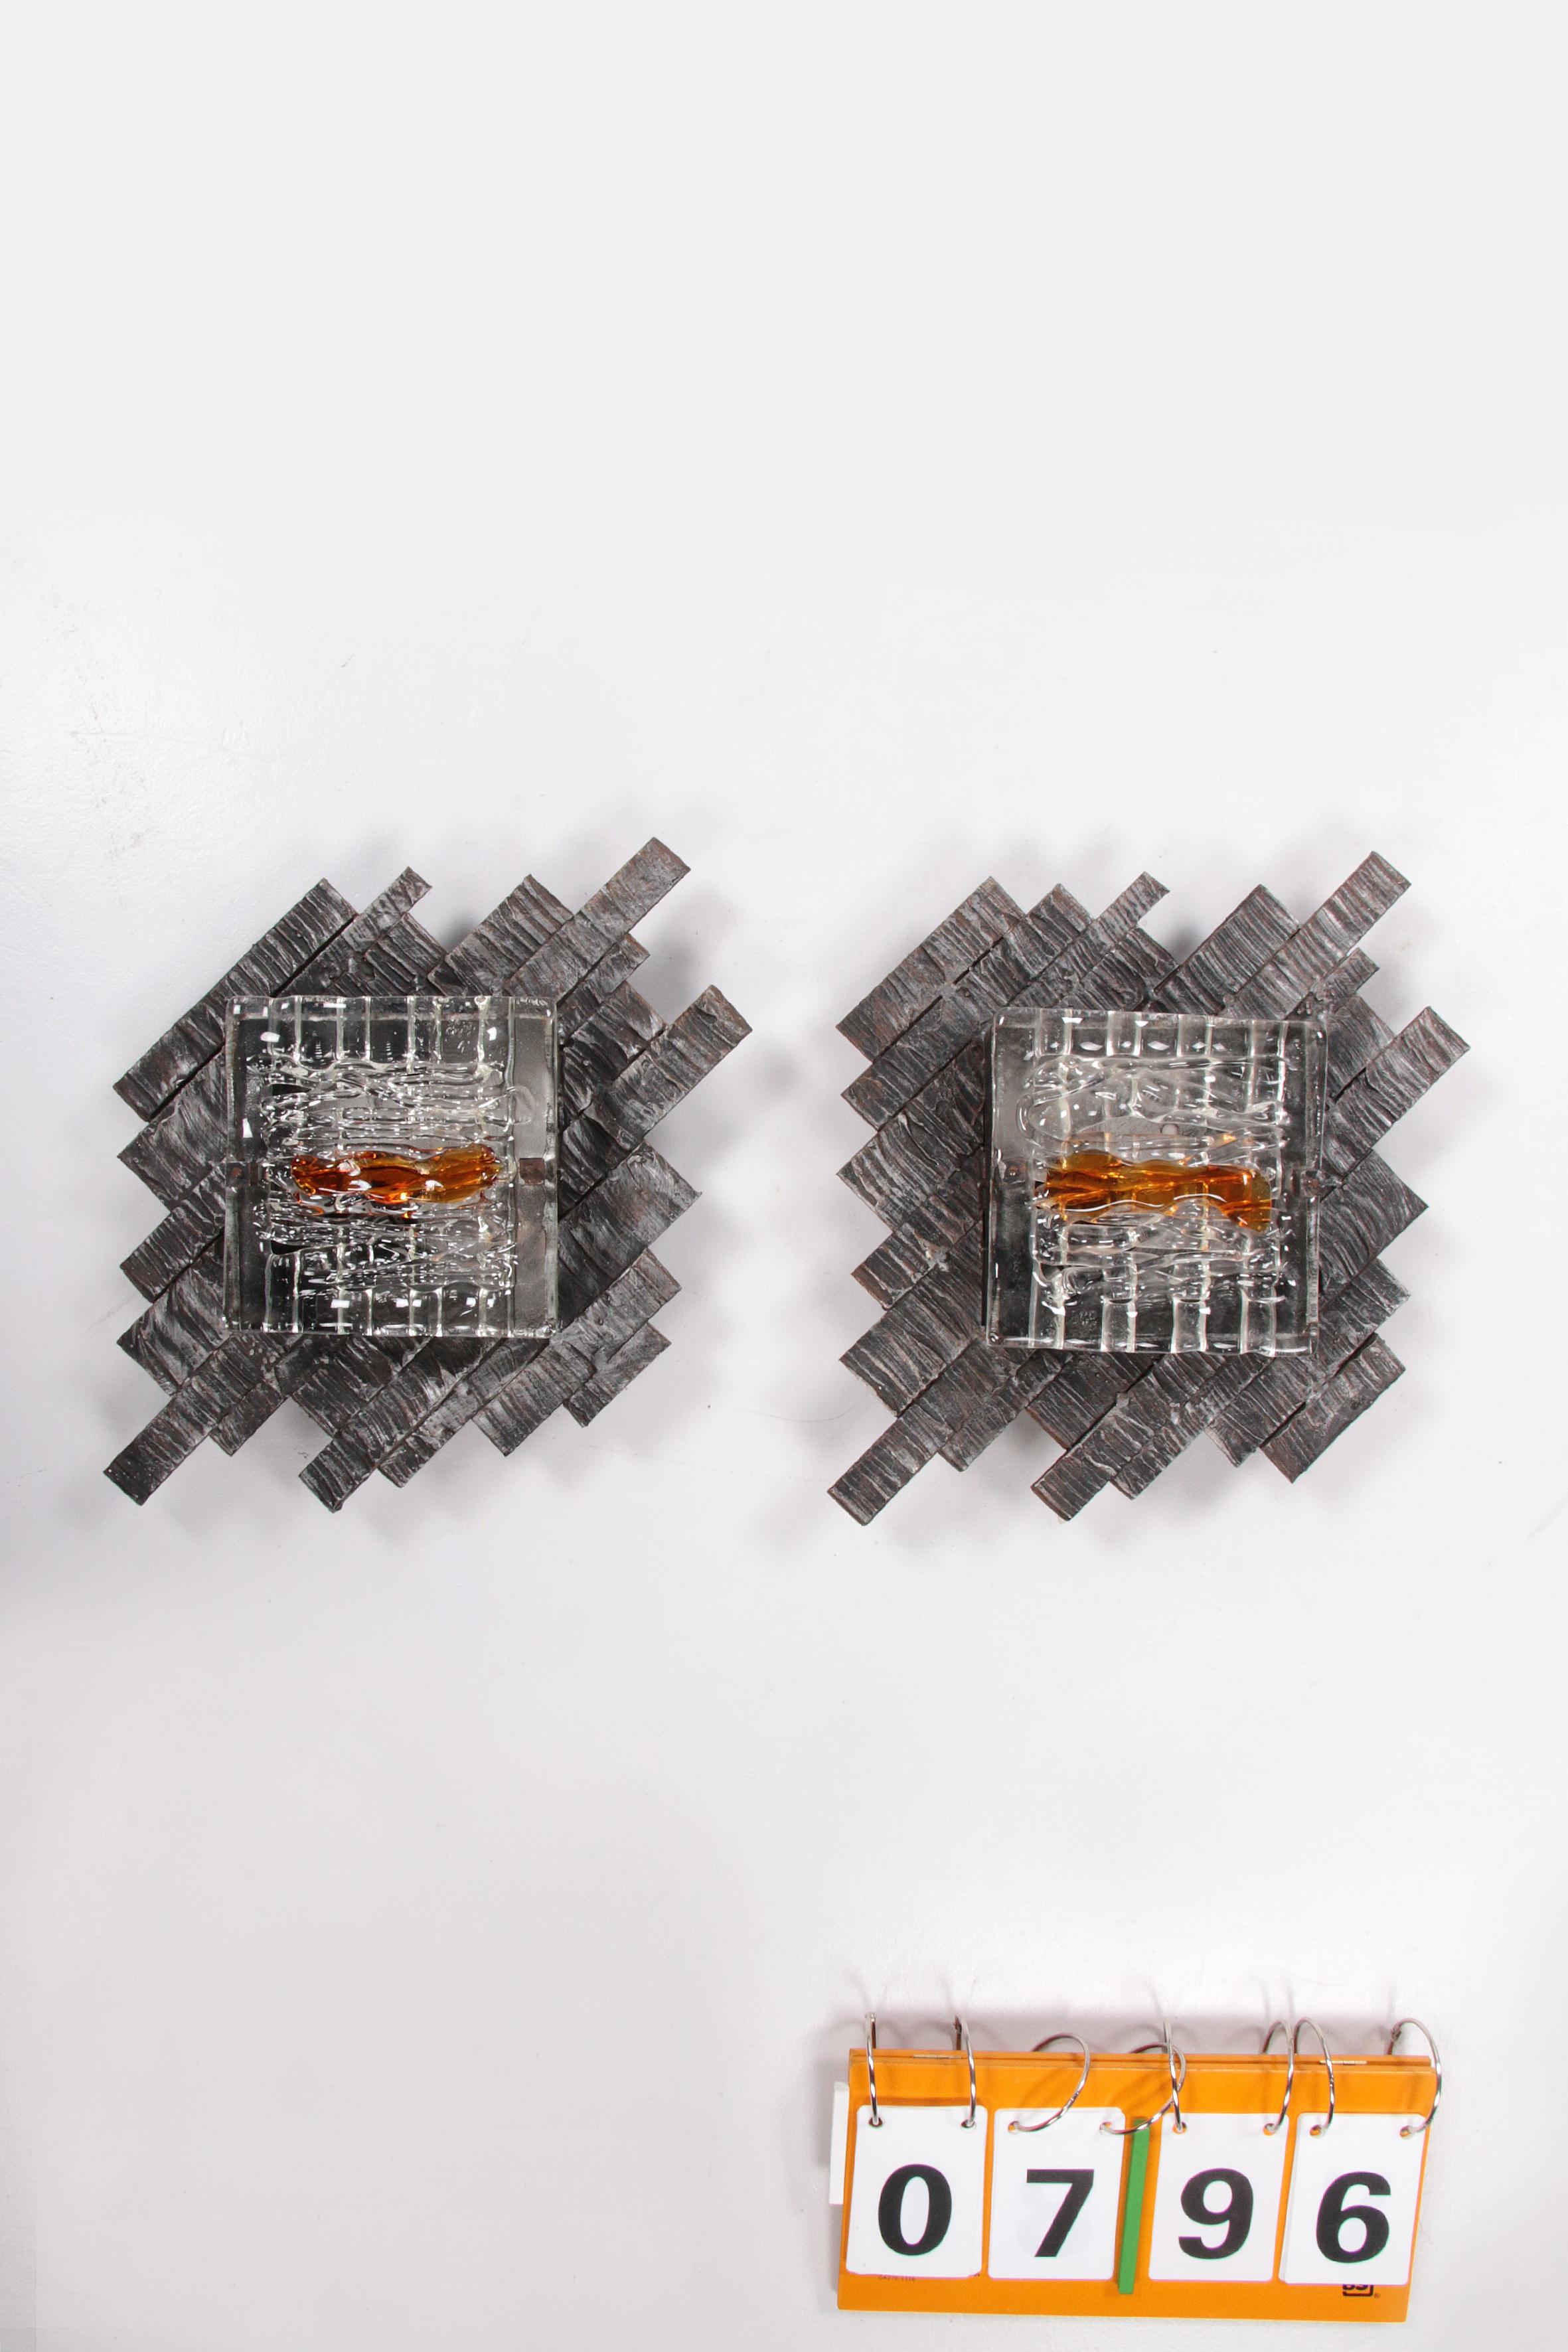 Brutalist Wall Lamps in Murano Glass by Albano Poli for Poliarte, 1970s For Sale 6